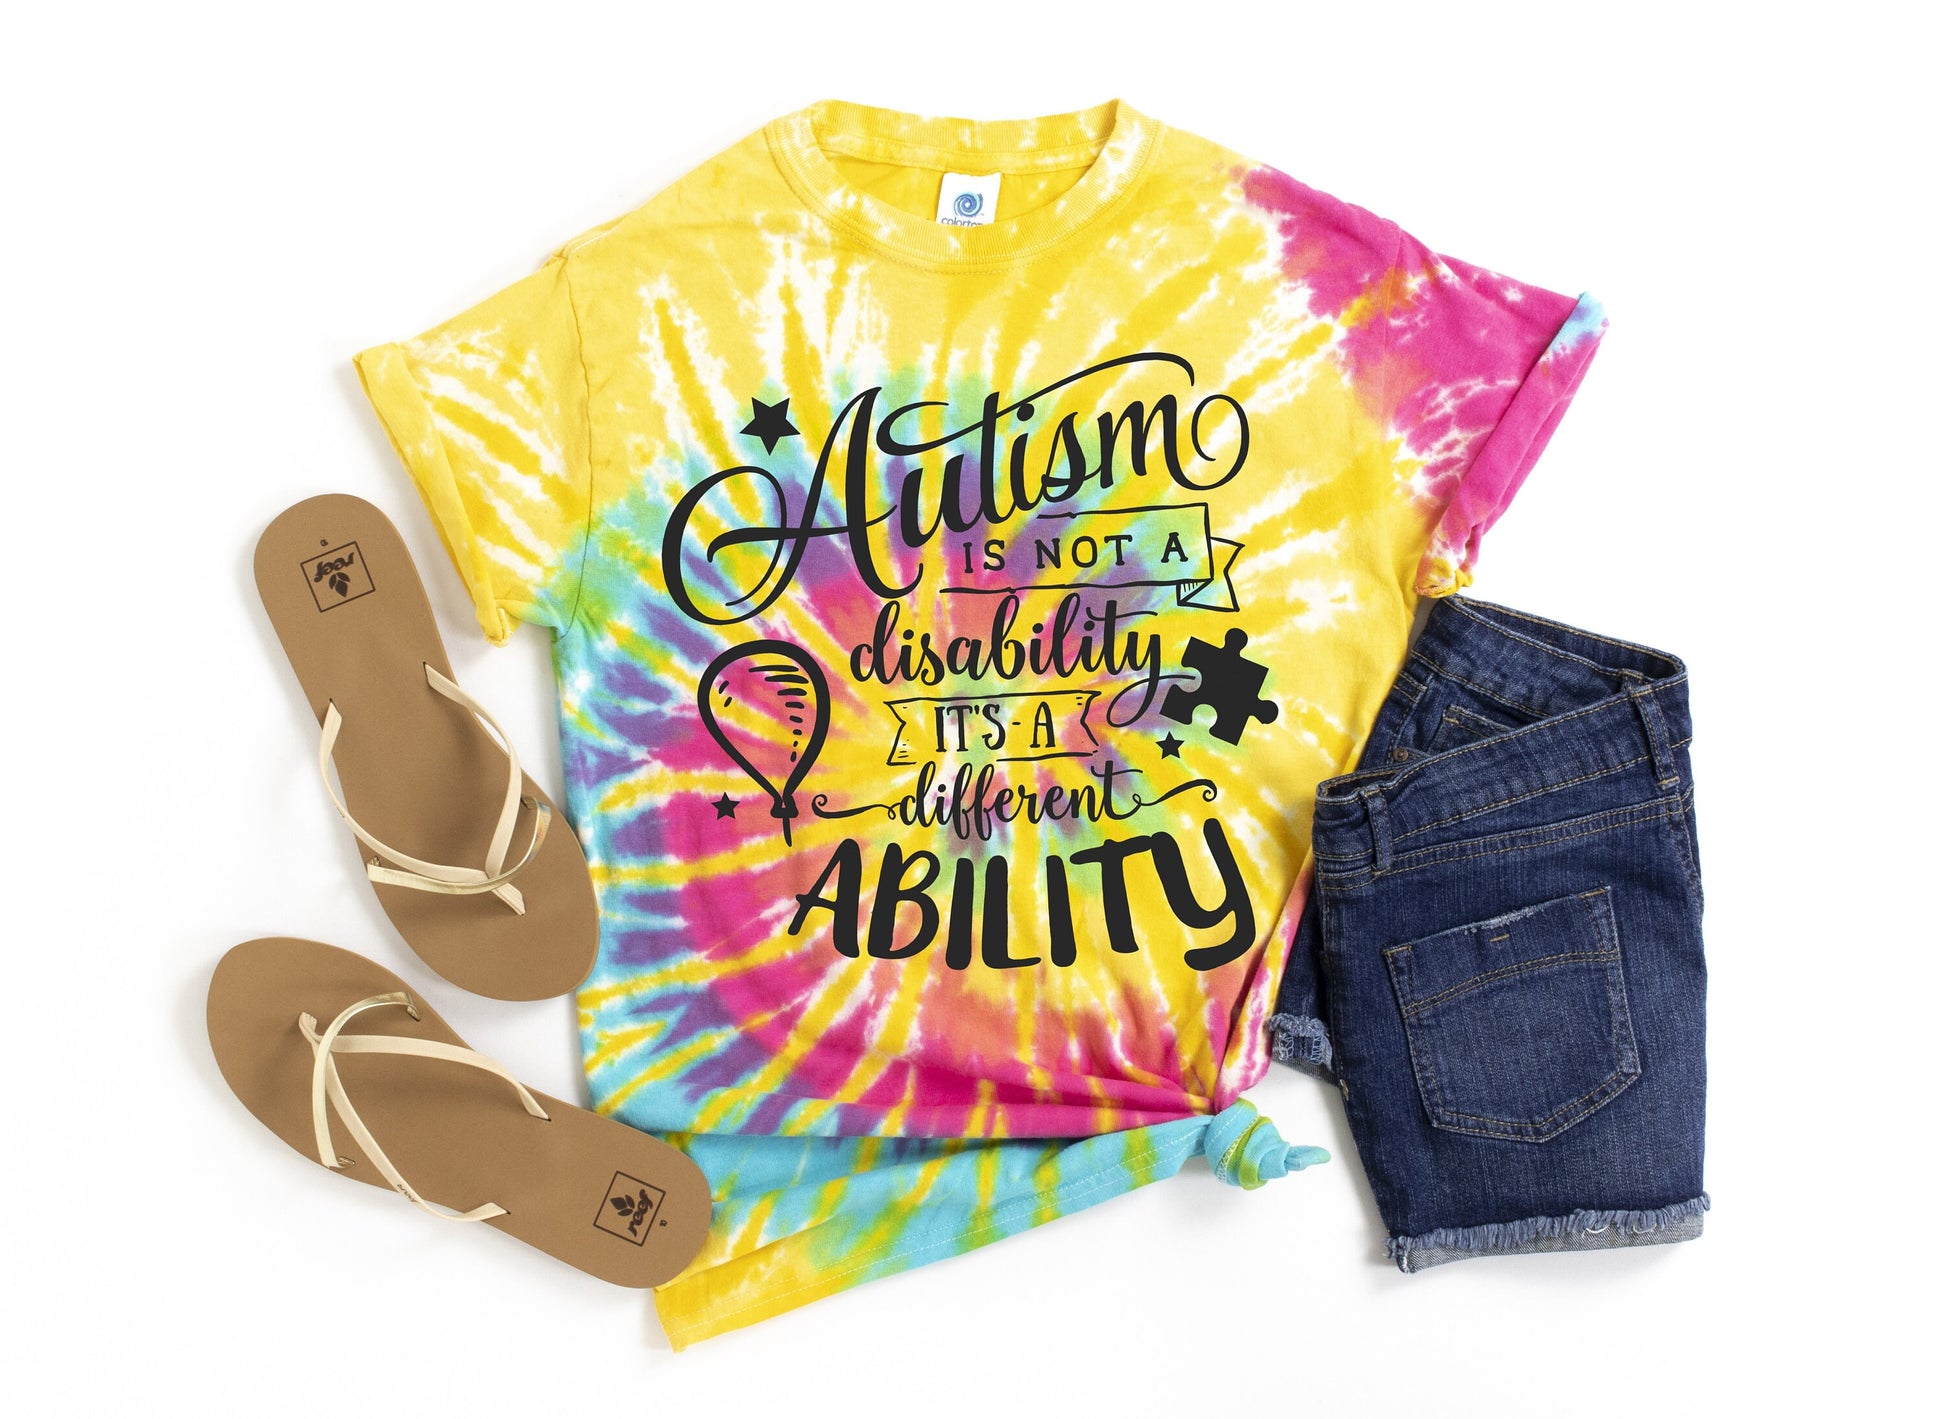 Autism is Not a Disability Tie Dye unisex t-shirt - Kids and Adults Sizes - Autism Awareness Shirt - Autism Support - Autism Kids Shirt